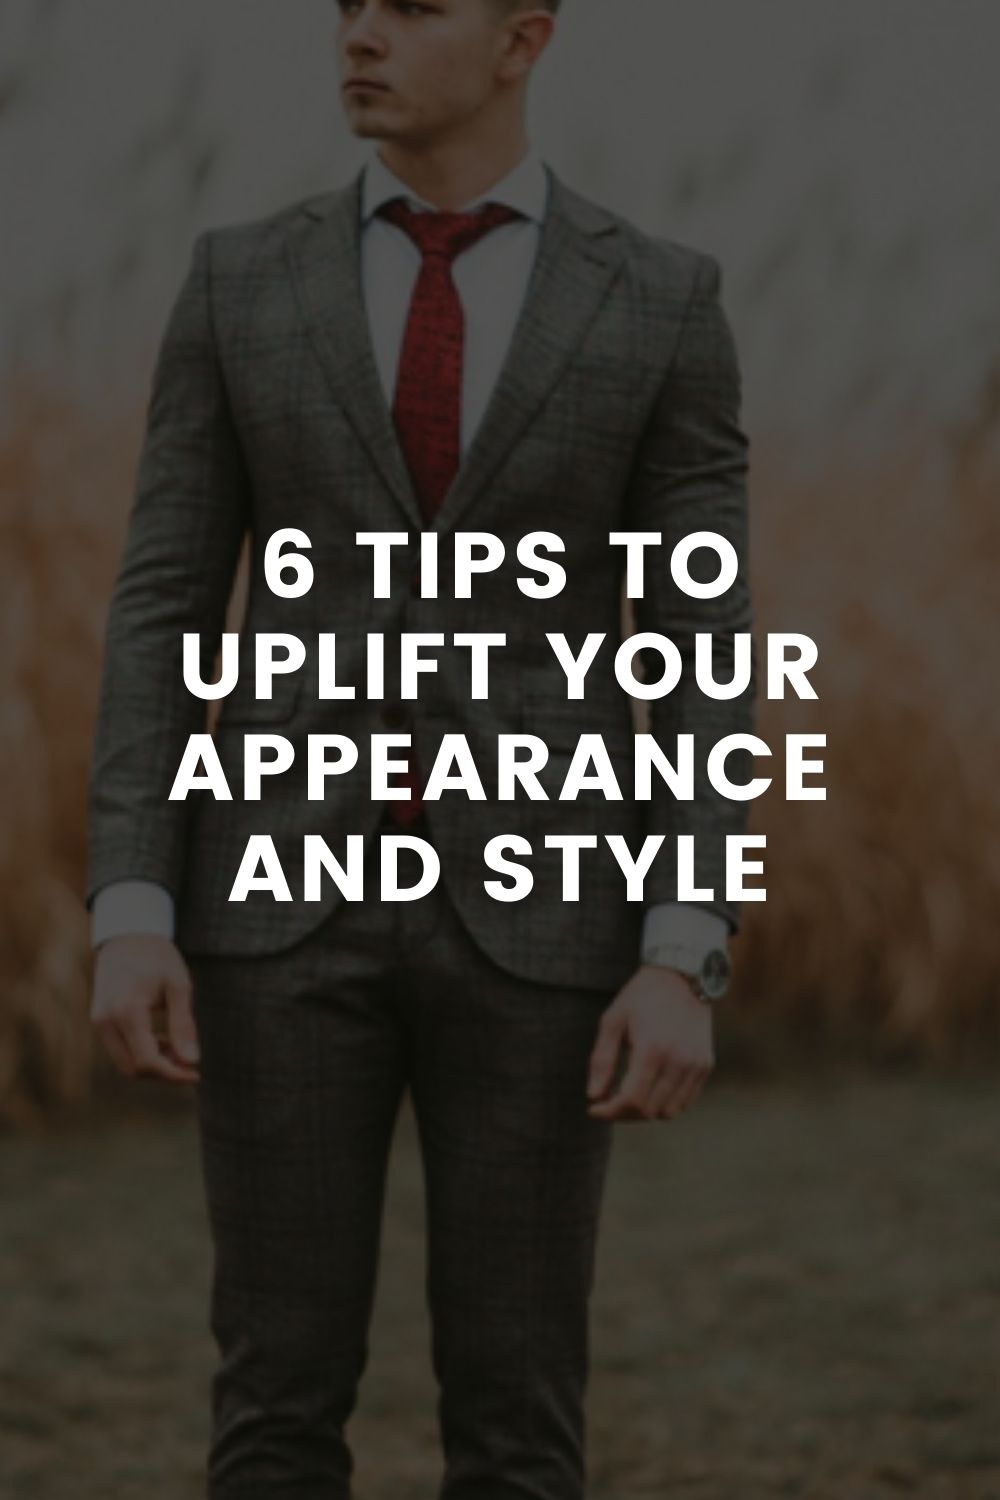 6 Tips To Uplift Your Appearance And Style